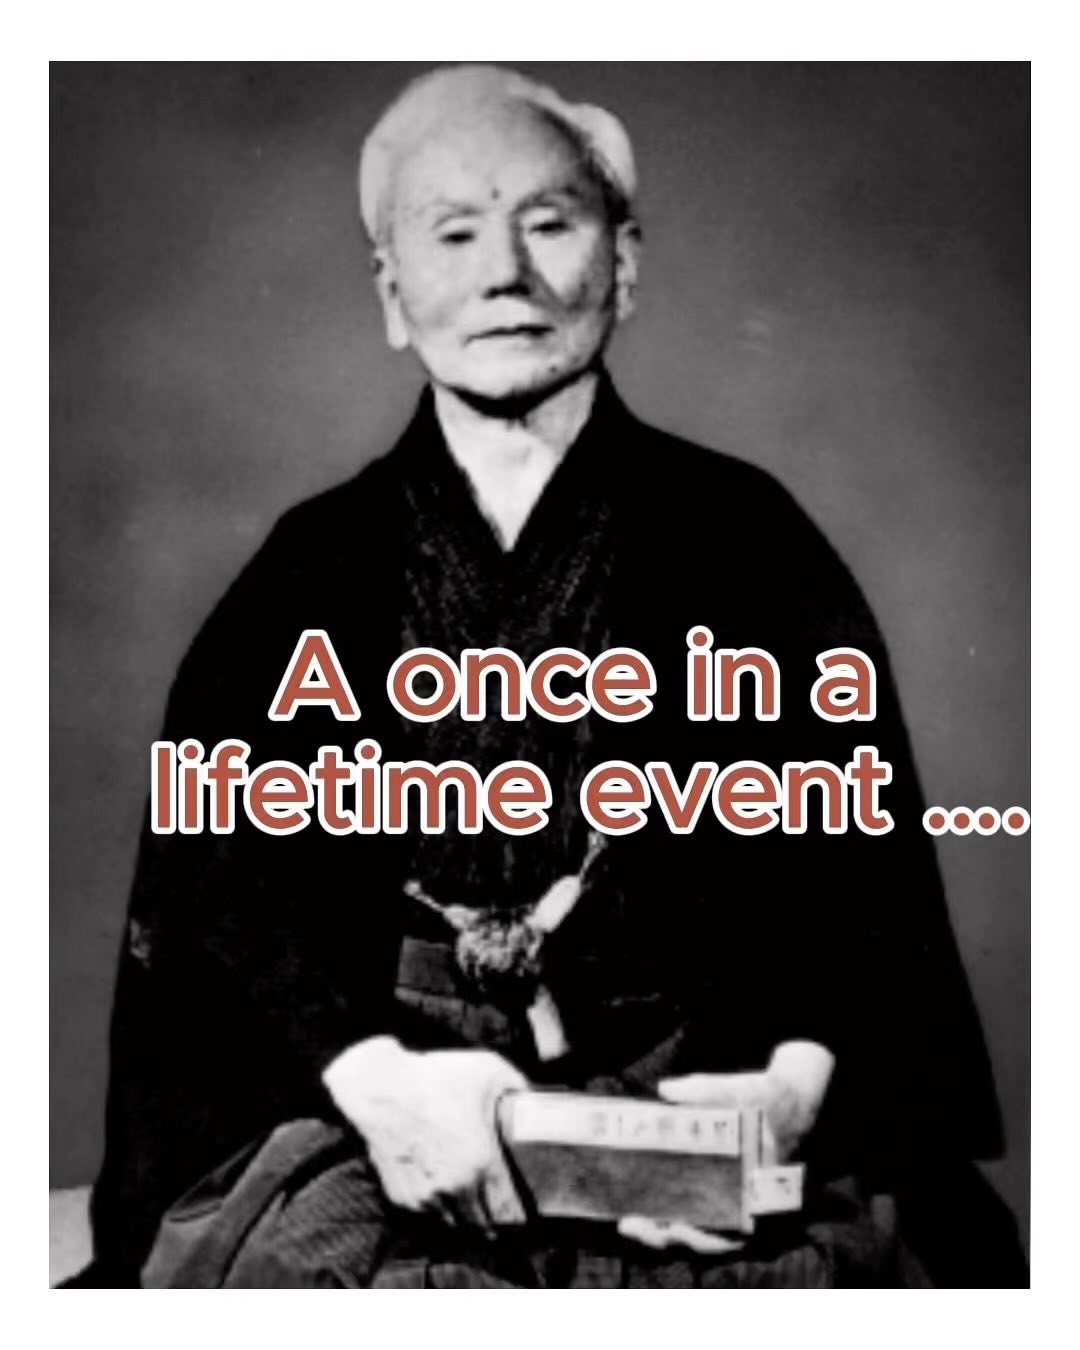 It’s not too late to be part of this once in a lifetime event celebrating the life of Gichin Funakoshi - the father of modern Karate. 8 big days of training , workshops and seminars with JKA and experience 4 different styles of traditional Okinawan Karate ! 
For more information, email funakoshi@ageshiojapan.com

#karate #shotokan #martialarts #sport #adventure #okinawa